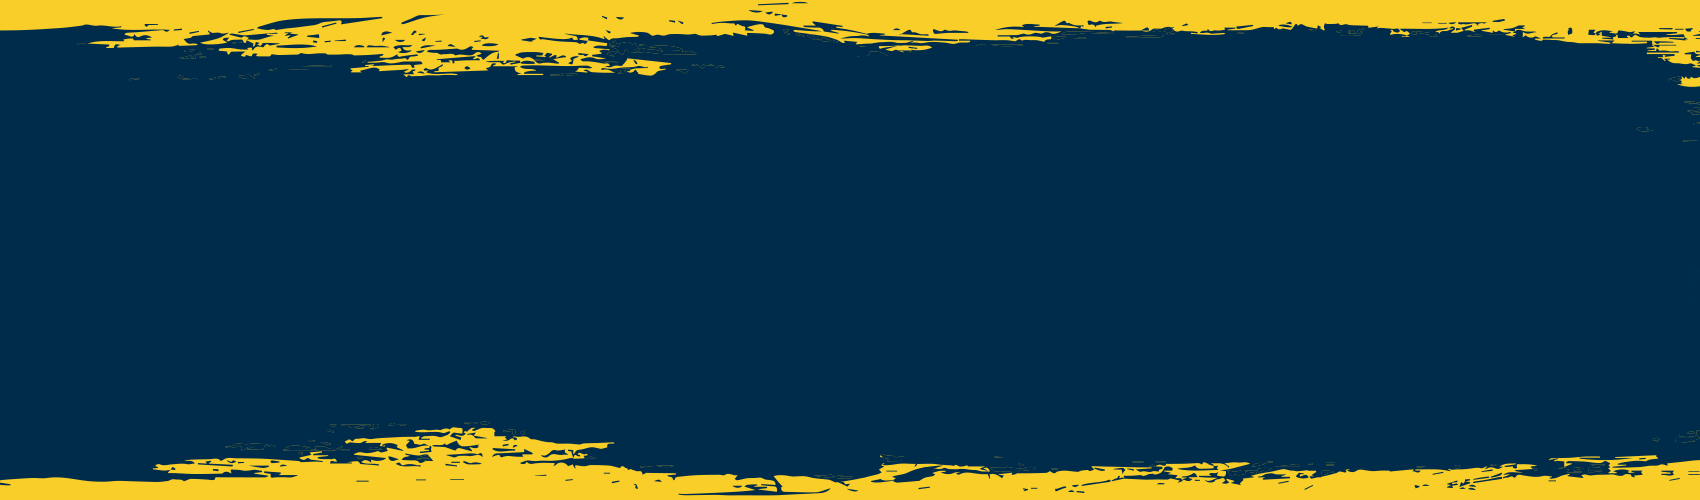 Blue banner with yellow background